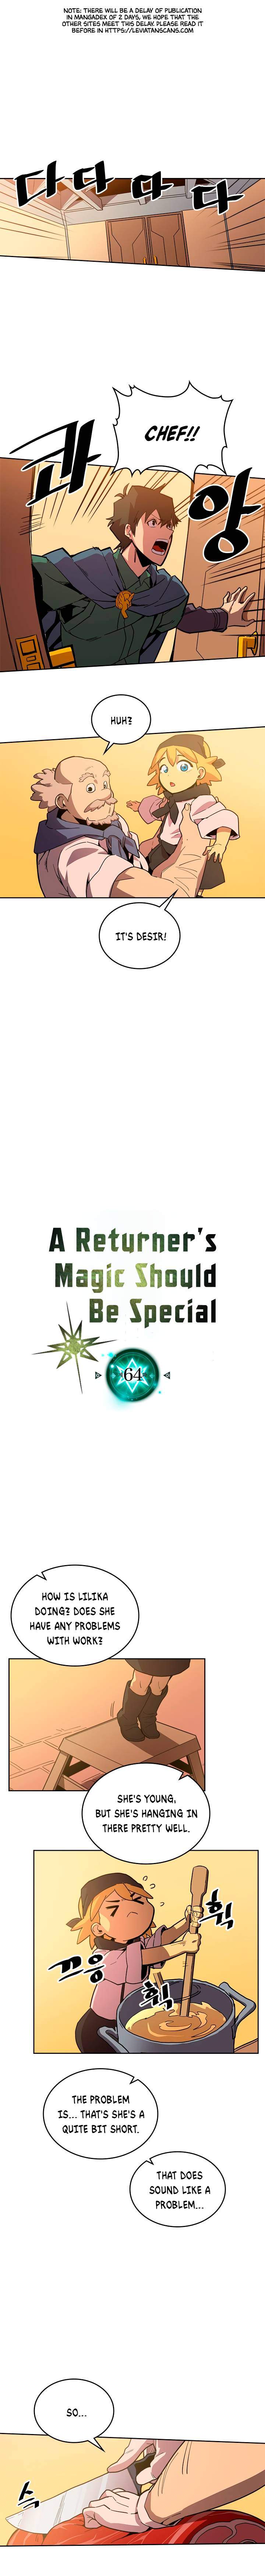 A Returner's Magic Should Be Special - Chapter 64 Page 2